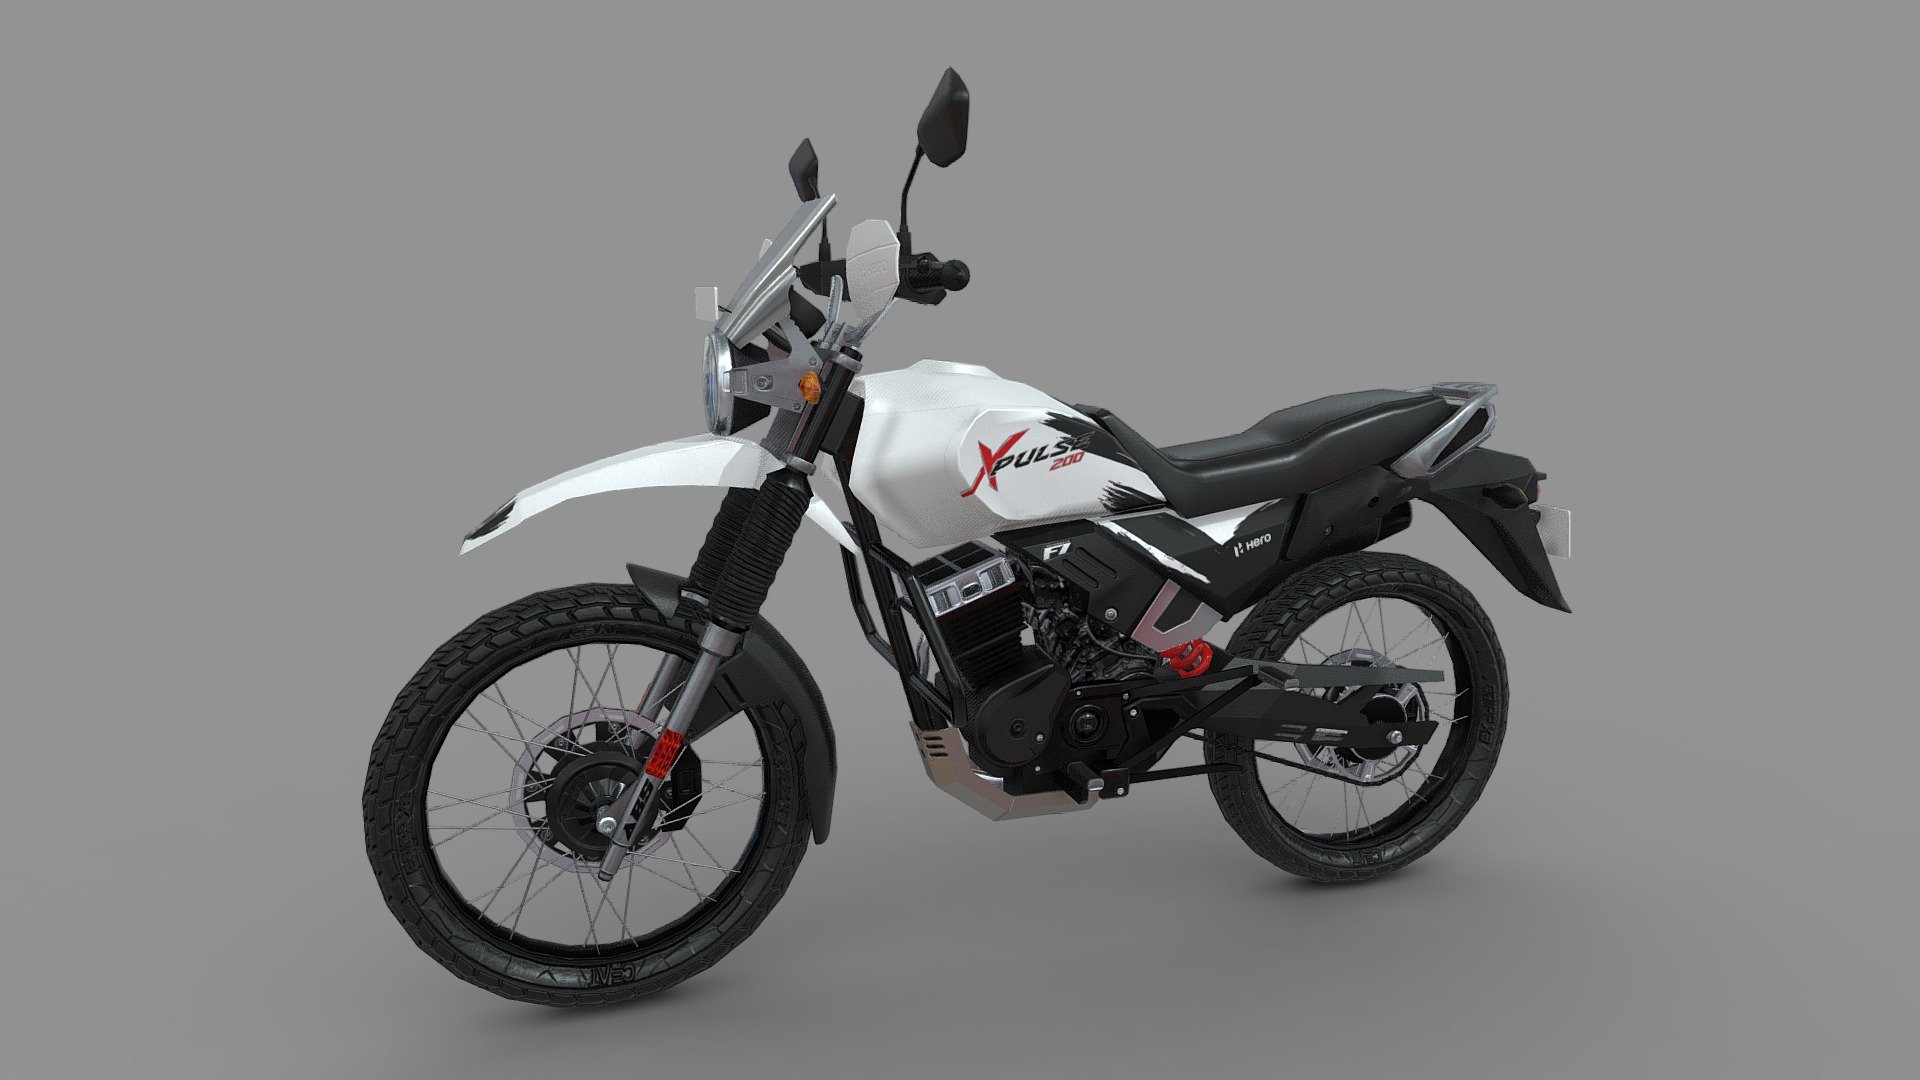 The Hero Xpulse is a Adventure Tourer and Off Road Bikes motorcycle known for its timeless design, comfort, and performance.
This 3D model of the Hero Xpulse captures the essence of a Adventure Tourer motorcycle. With its sleek and stylish design, the Hero Xpulse is a sight to behold.
Model Type: Polygonal
Polygons: 12,313
Vertices: 12,411
Formats available: Maya ASCII 2018, Maya Binary 2018, FBX , OBJ
Textures: Color, Normal, Height, Metallic, Roughness and Opacity maps
Texture Resolution: 4096 x 4096 pixels

The model is fully optimized for use in real-time applications, making it suitable for use in virtual reality, augmented reality, mobile games, PC games and other interactive experiences.

Whether you're a fan of Adventure Tourer or appreciate well-designed motorcycles, this 3D model of the Hero Xpulse is sure to impress.

Hope you like it! - Hero Xpulse - 3D model by Bhavik_Suthar 3d model